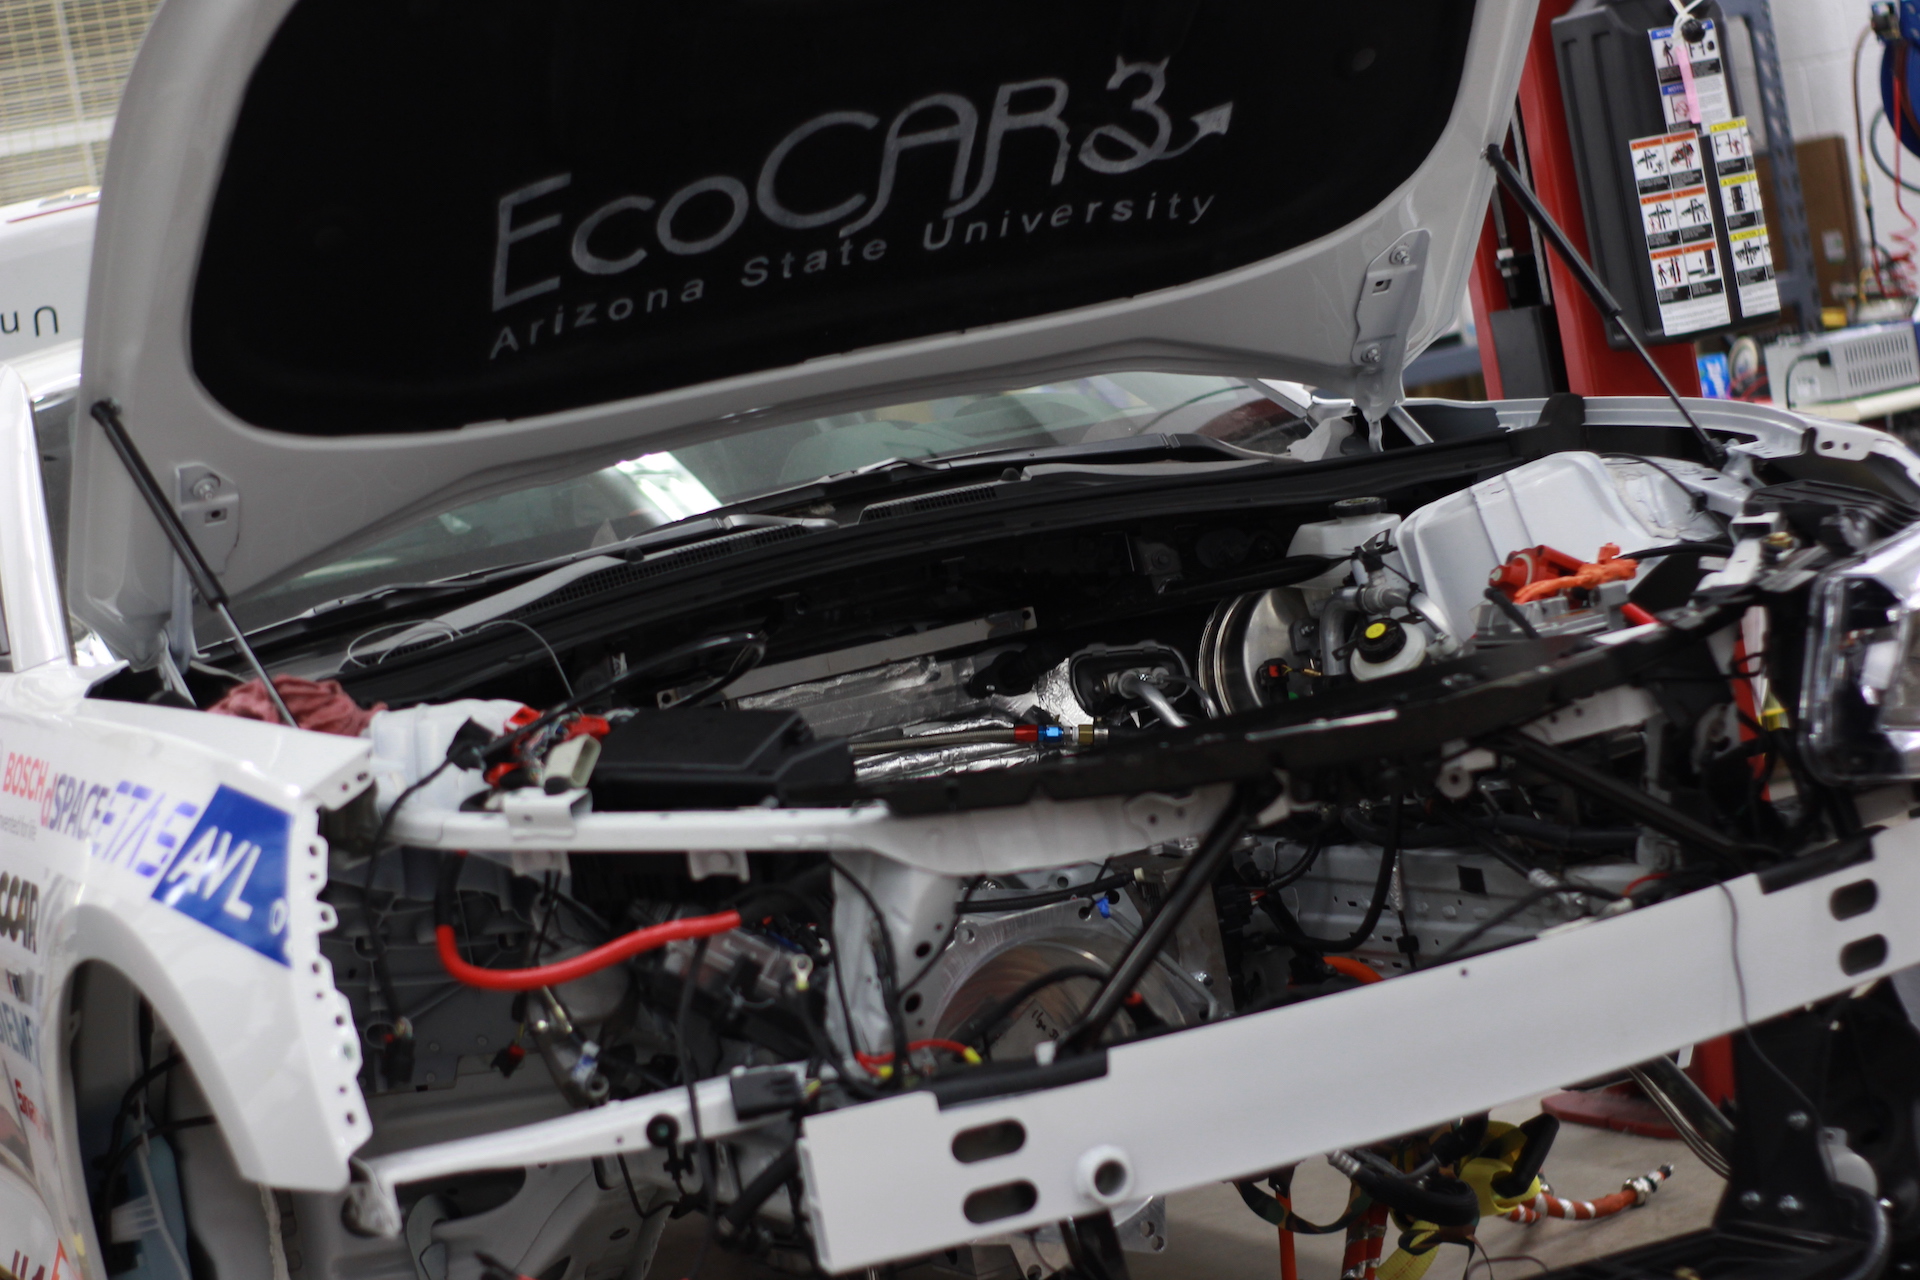 under the hood of ASU's EcoCAR3